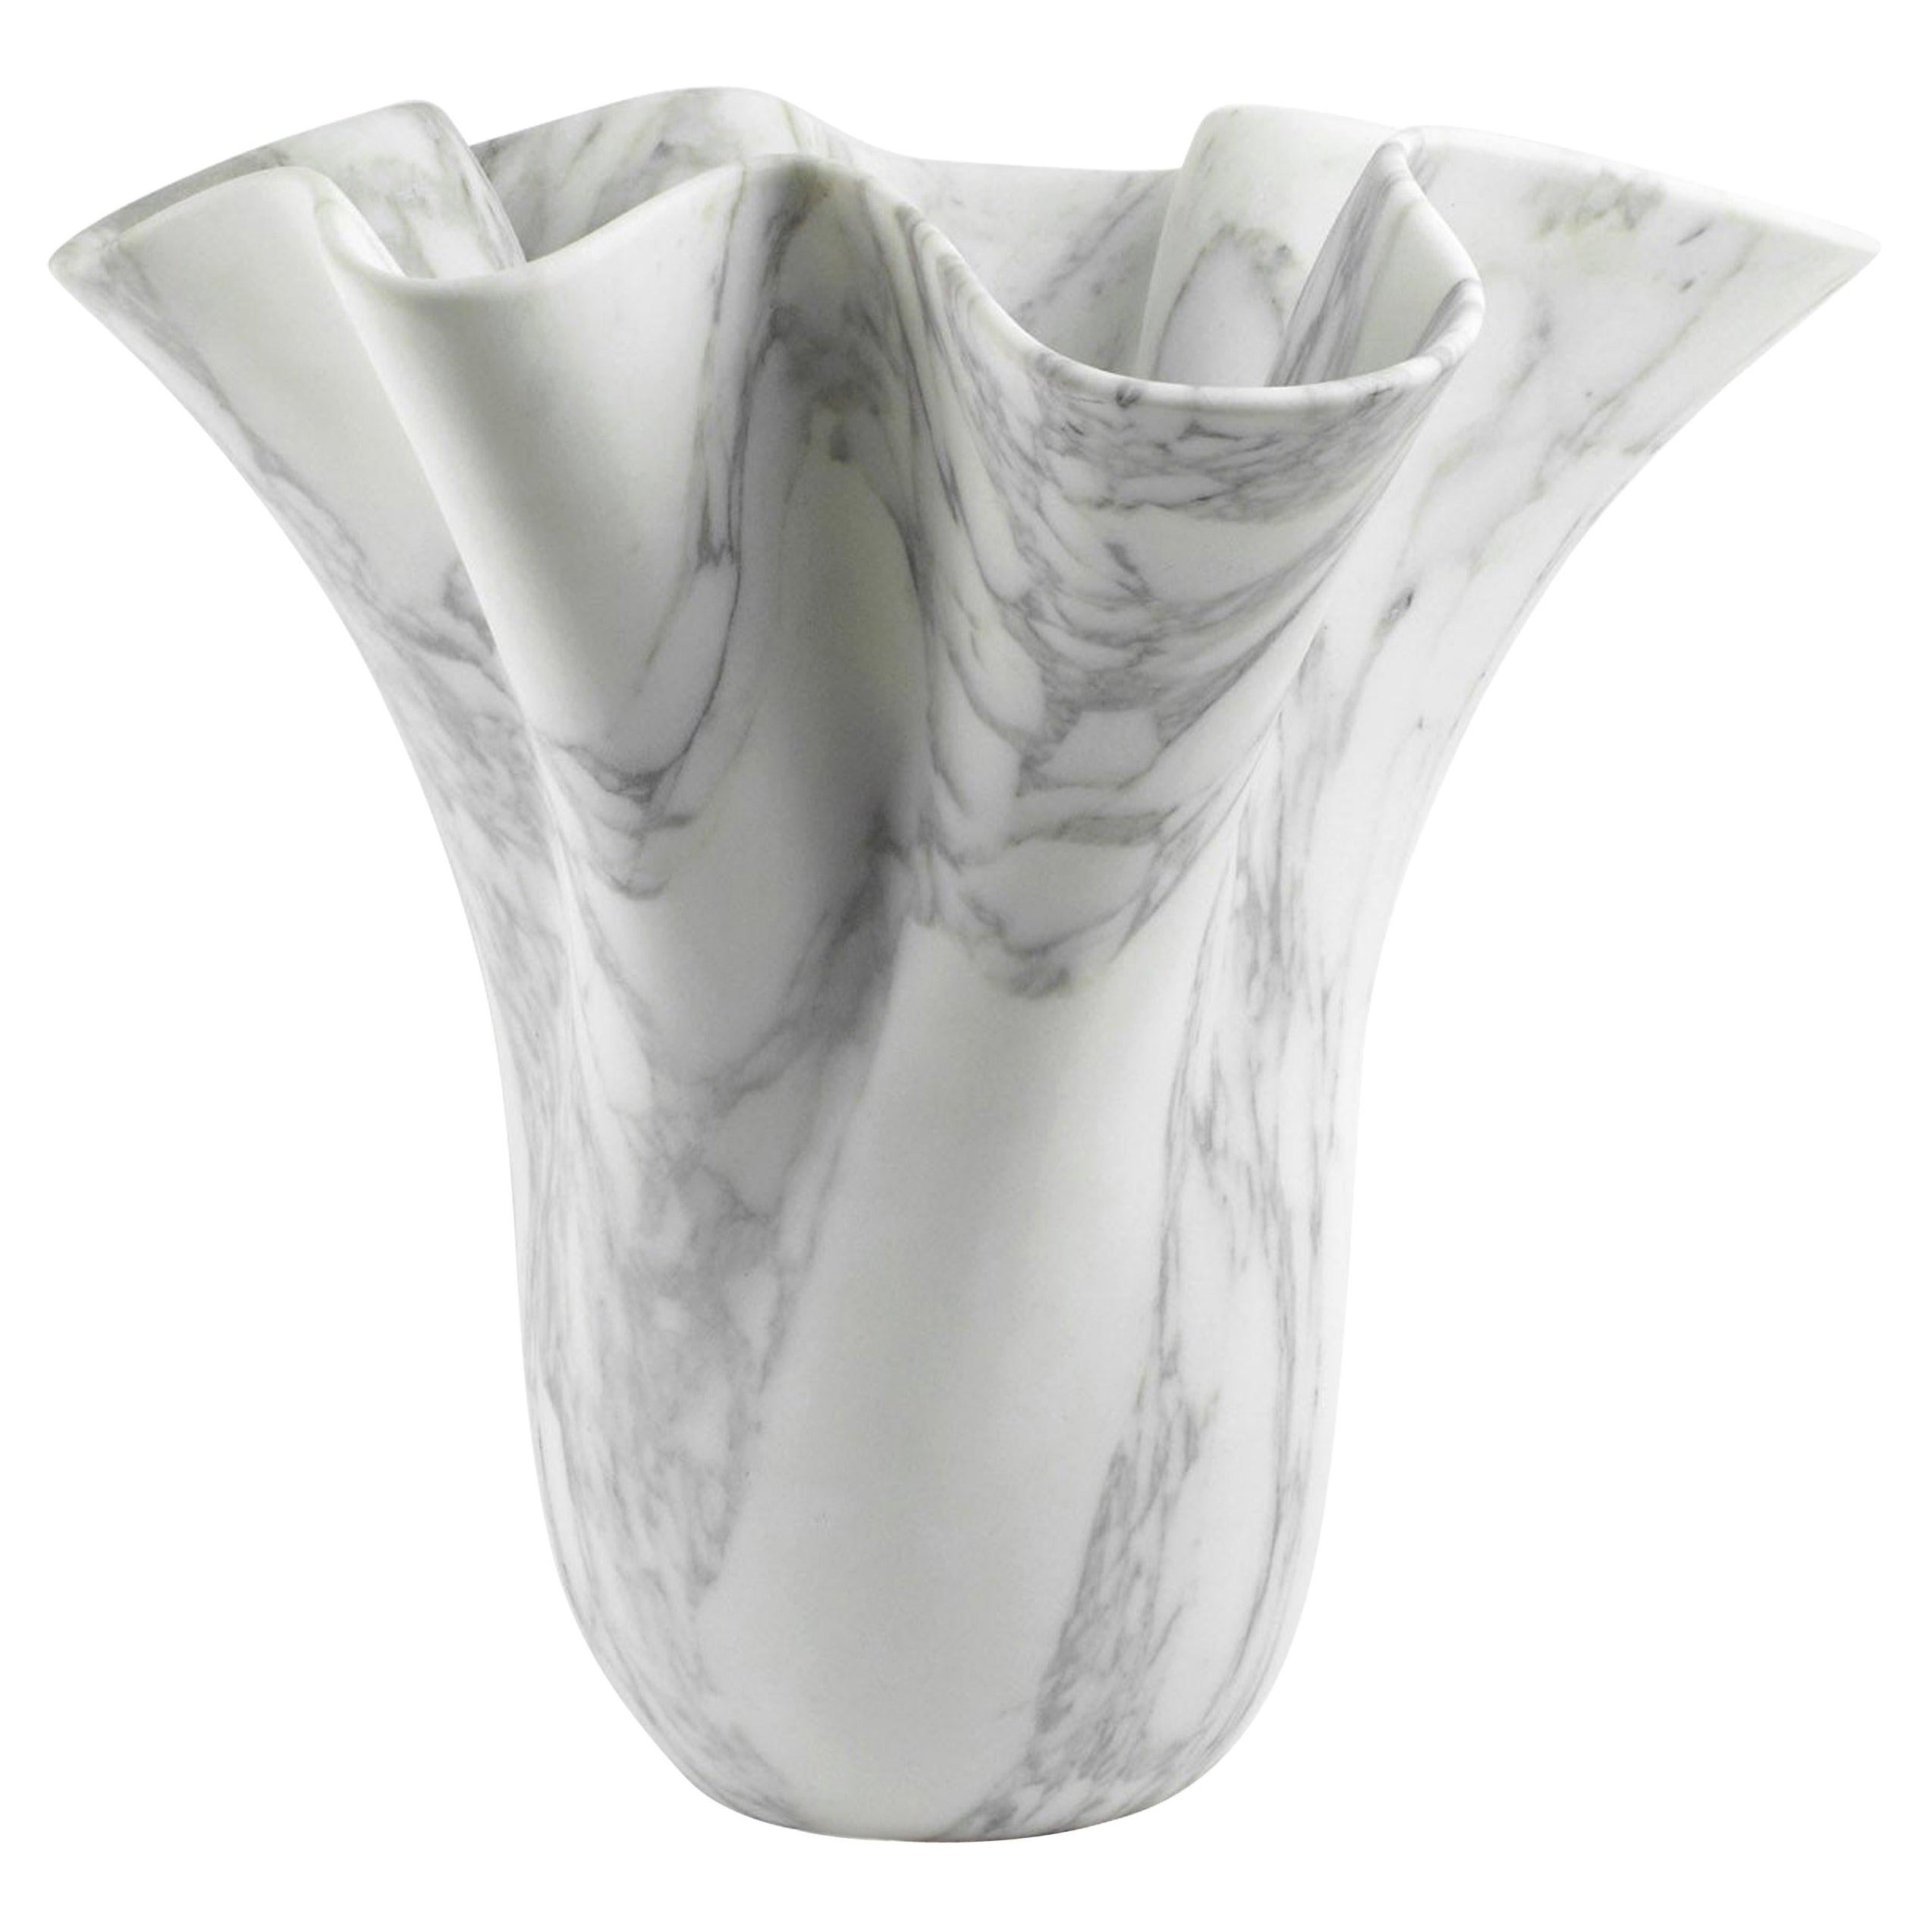 Marble Vase Decorative Sculpture White Arabescato Marble Handmade Italy For Sale